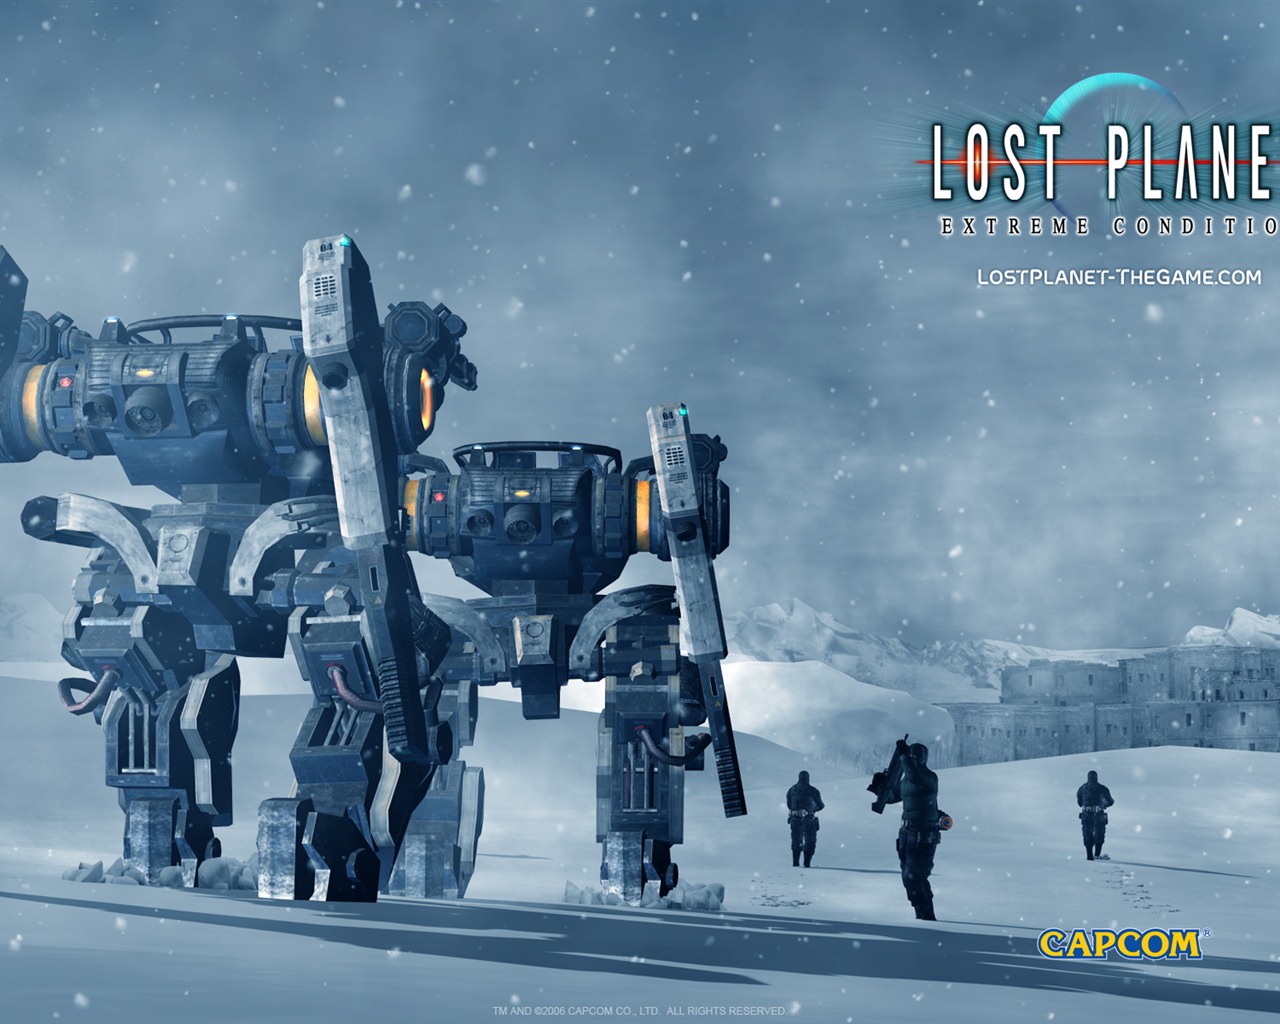 Lost Planet: Extreme Condition HD tapety na plochu #1 - 1280x1024